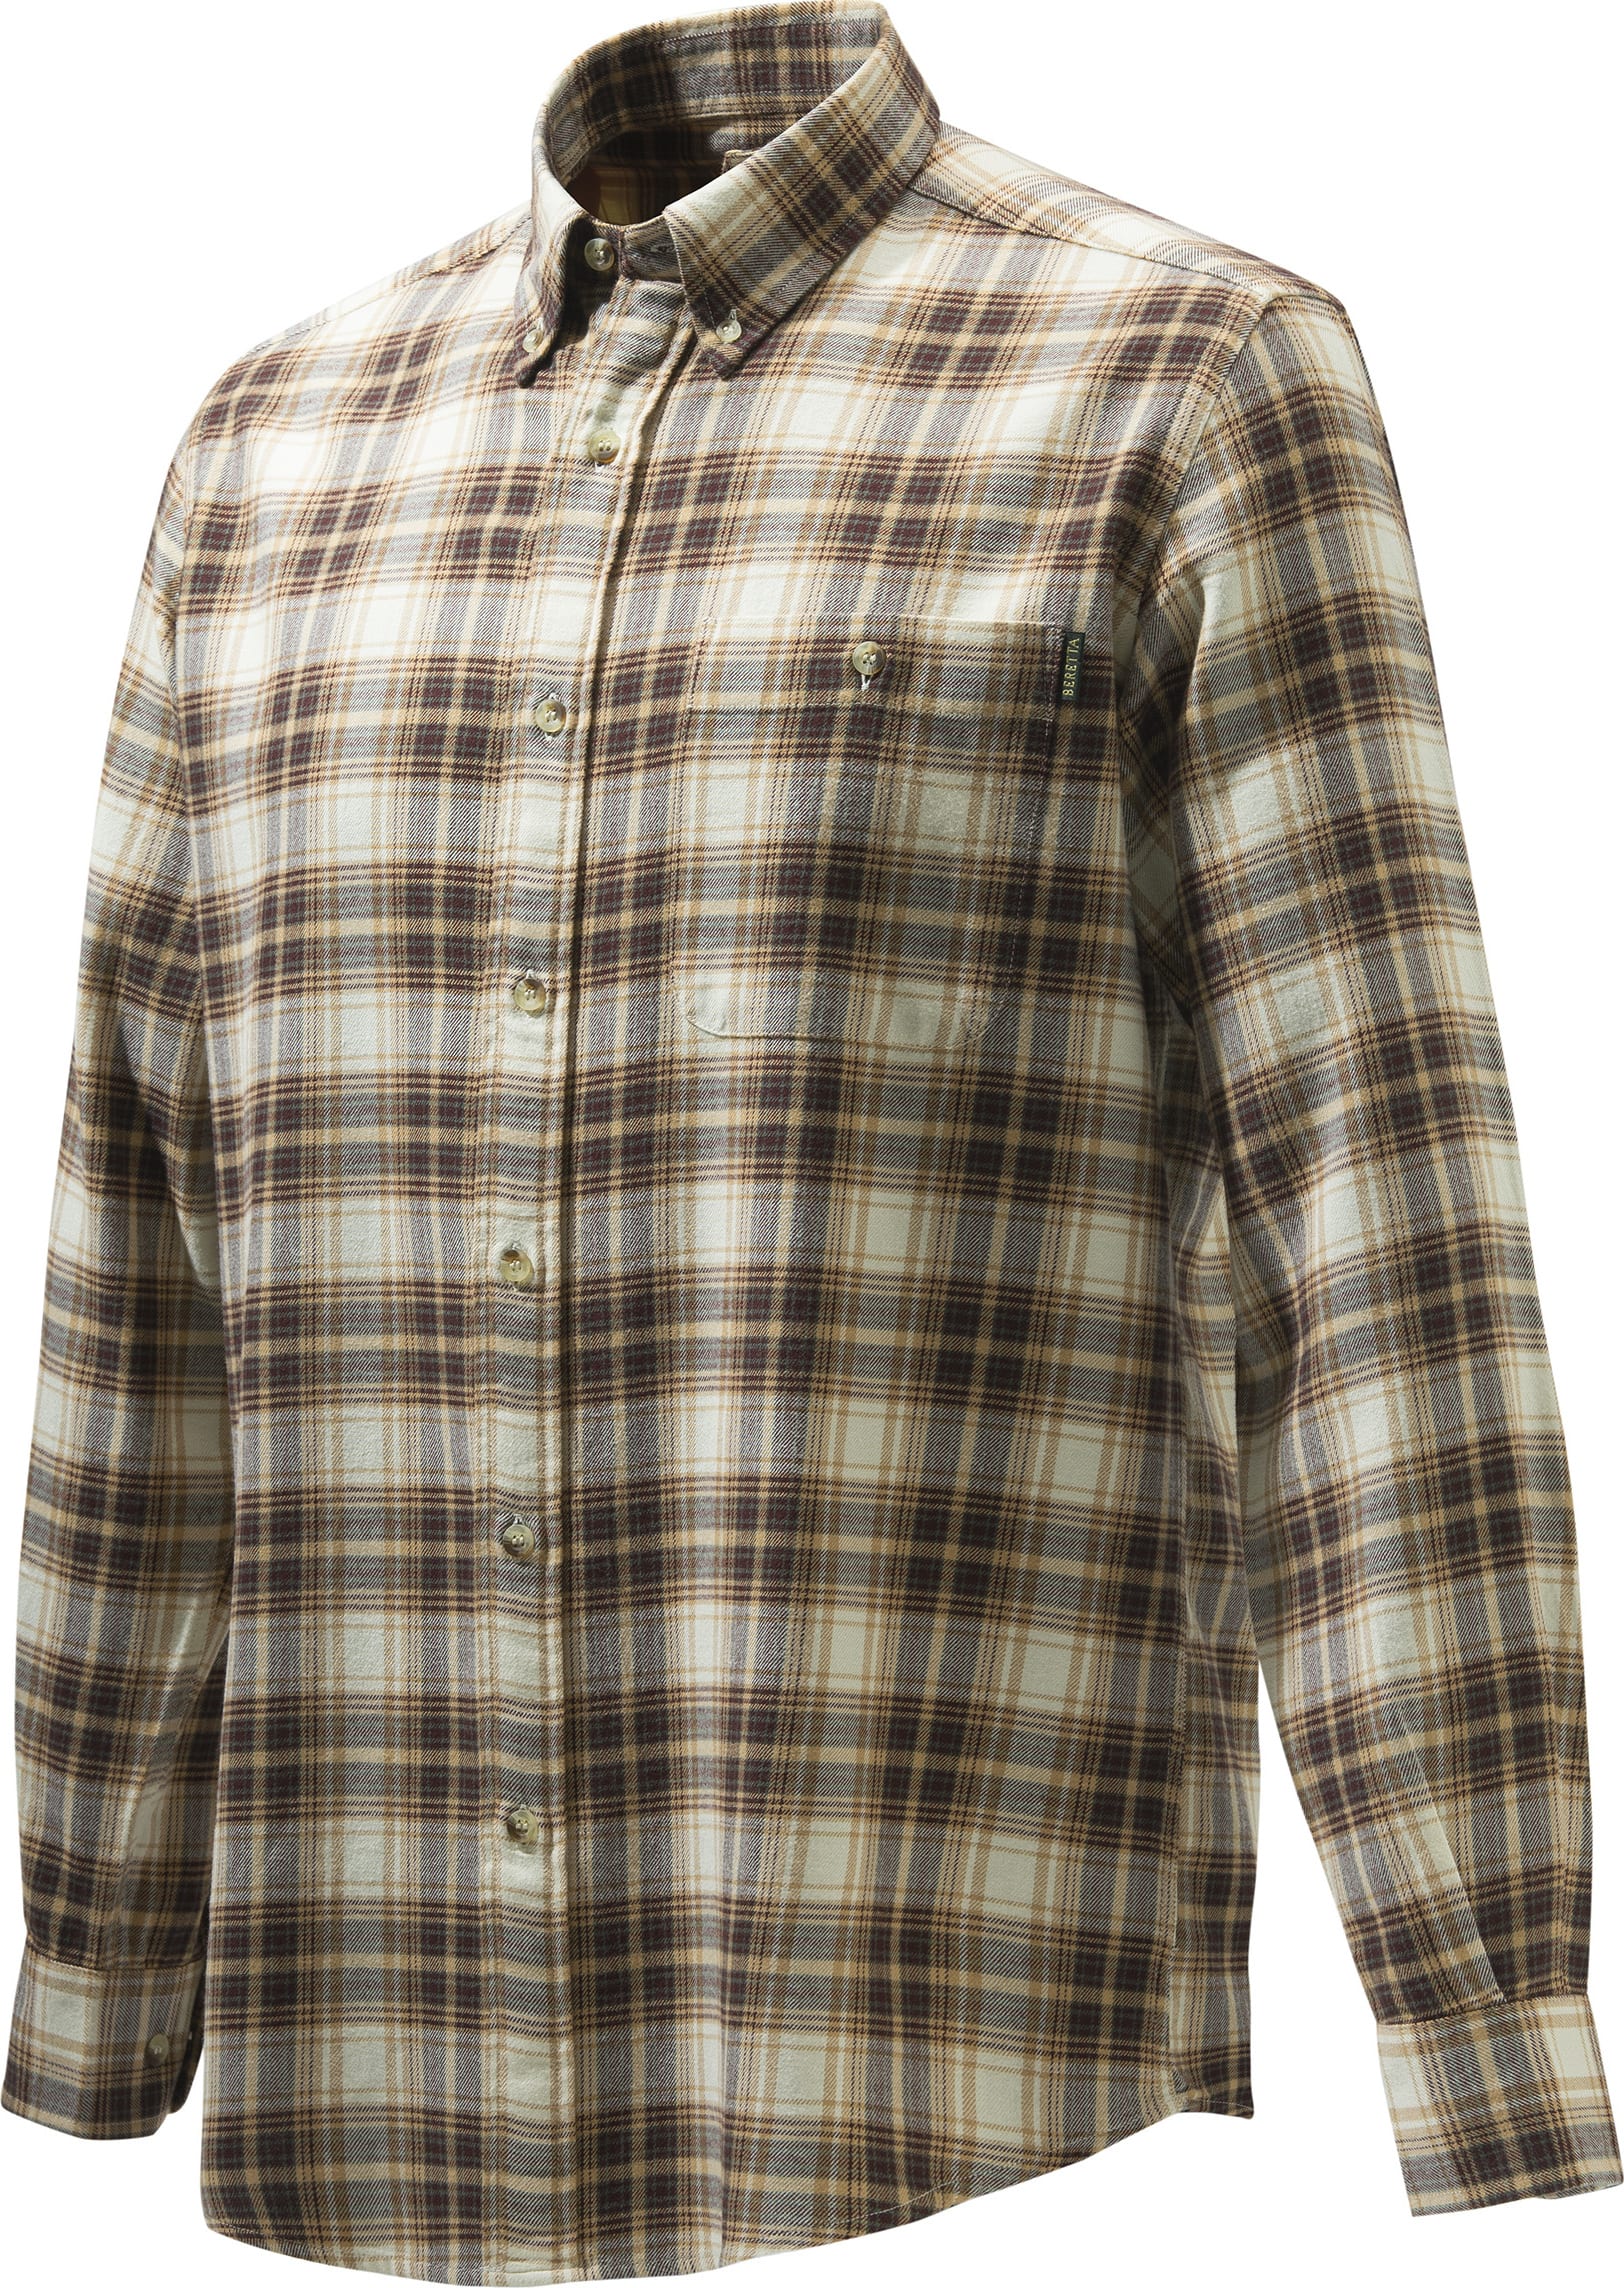 Buy Beretta Men's Wood Flannel Button Down Shirt from Outnorth